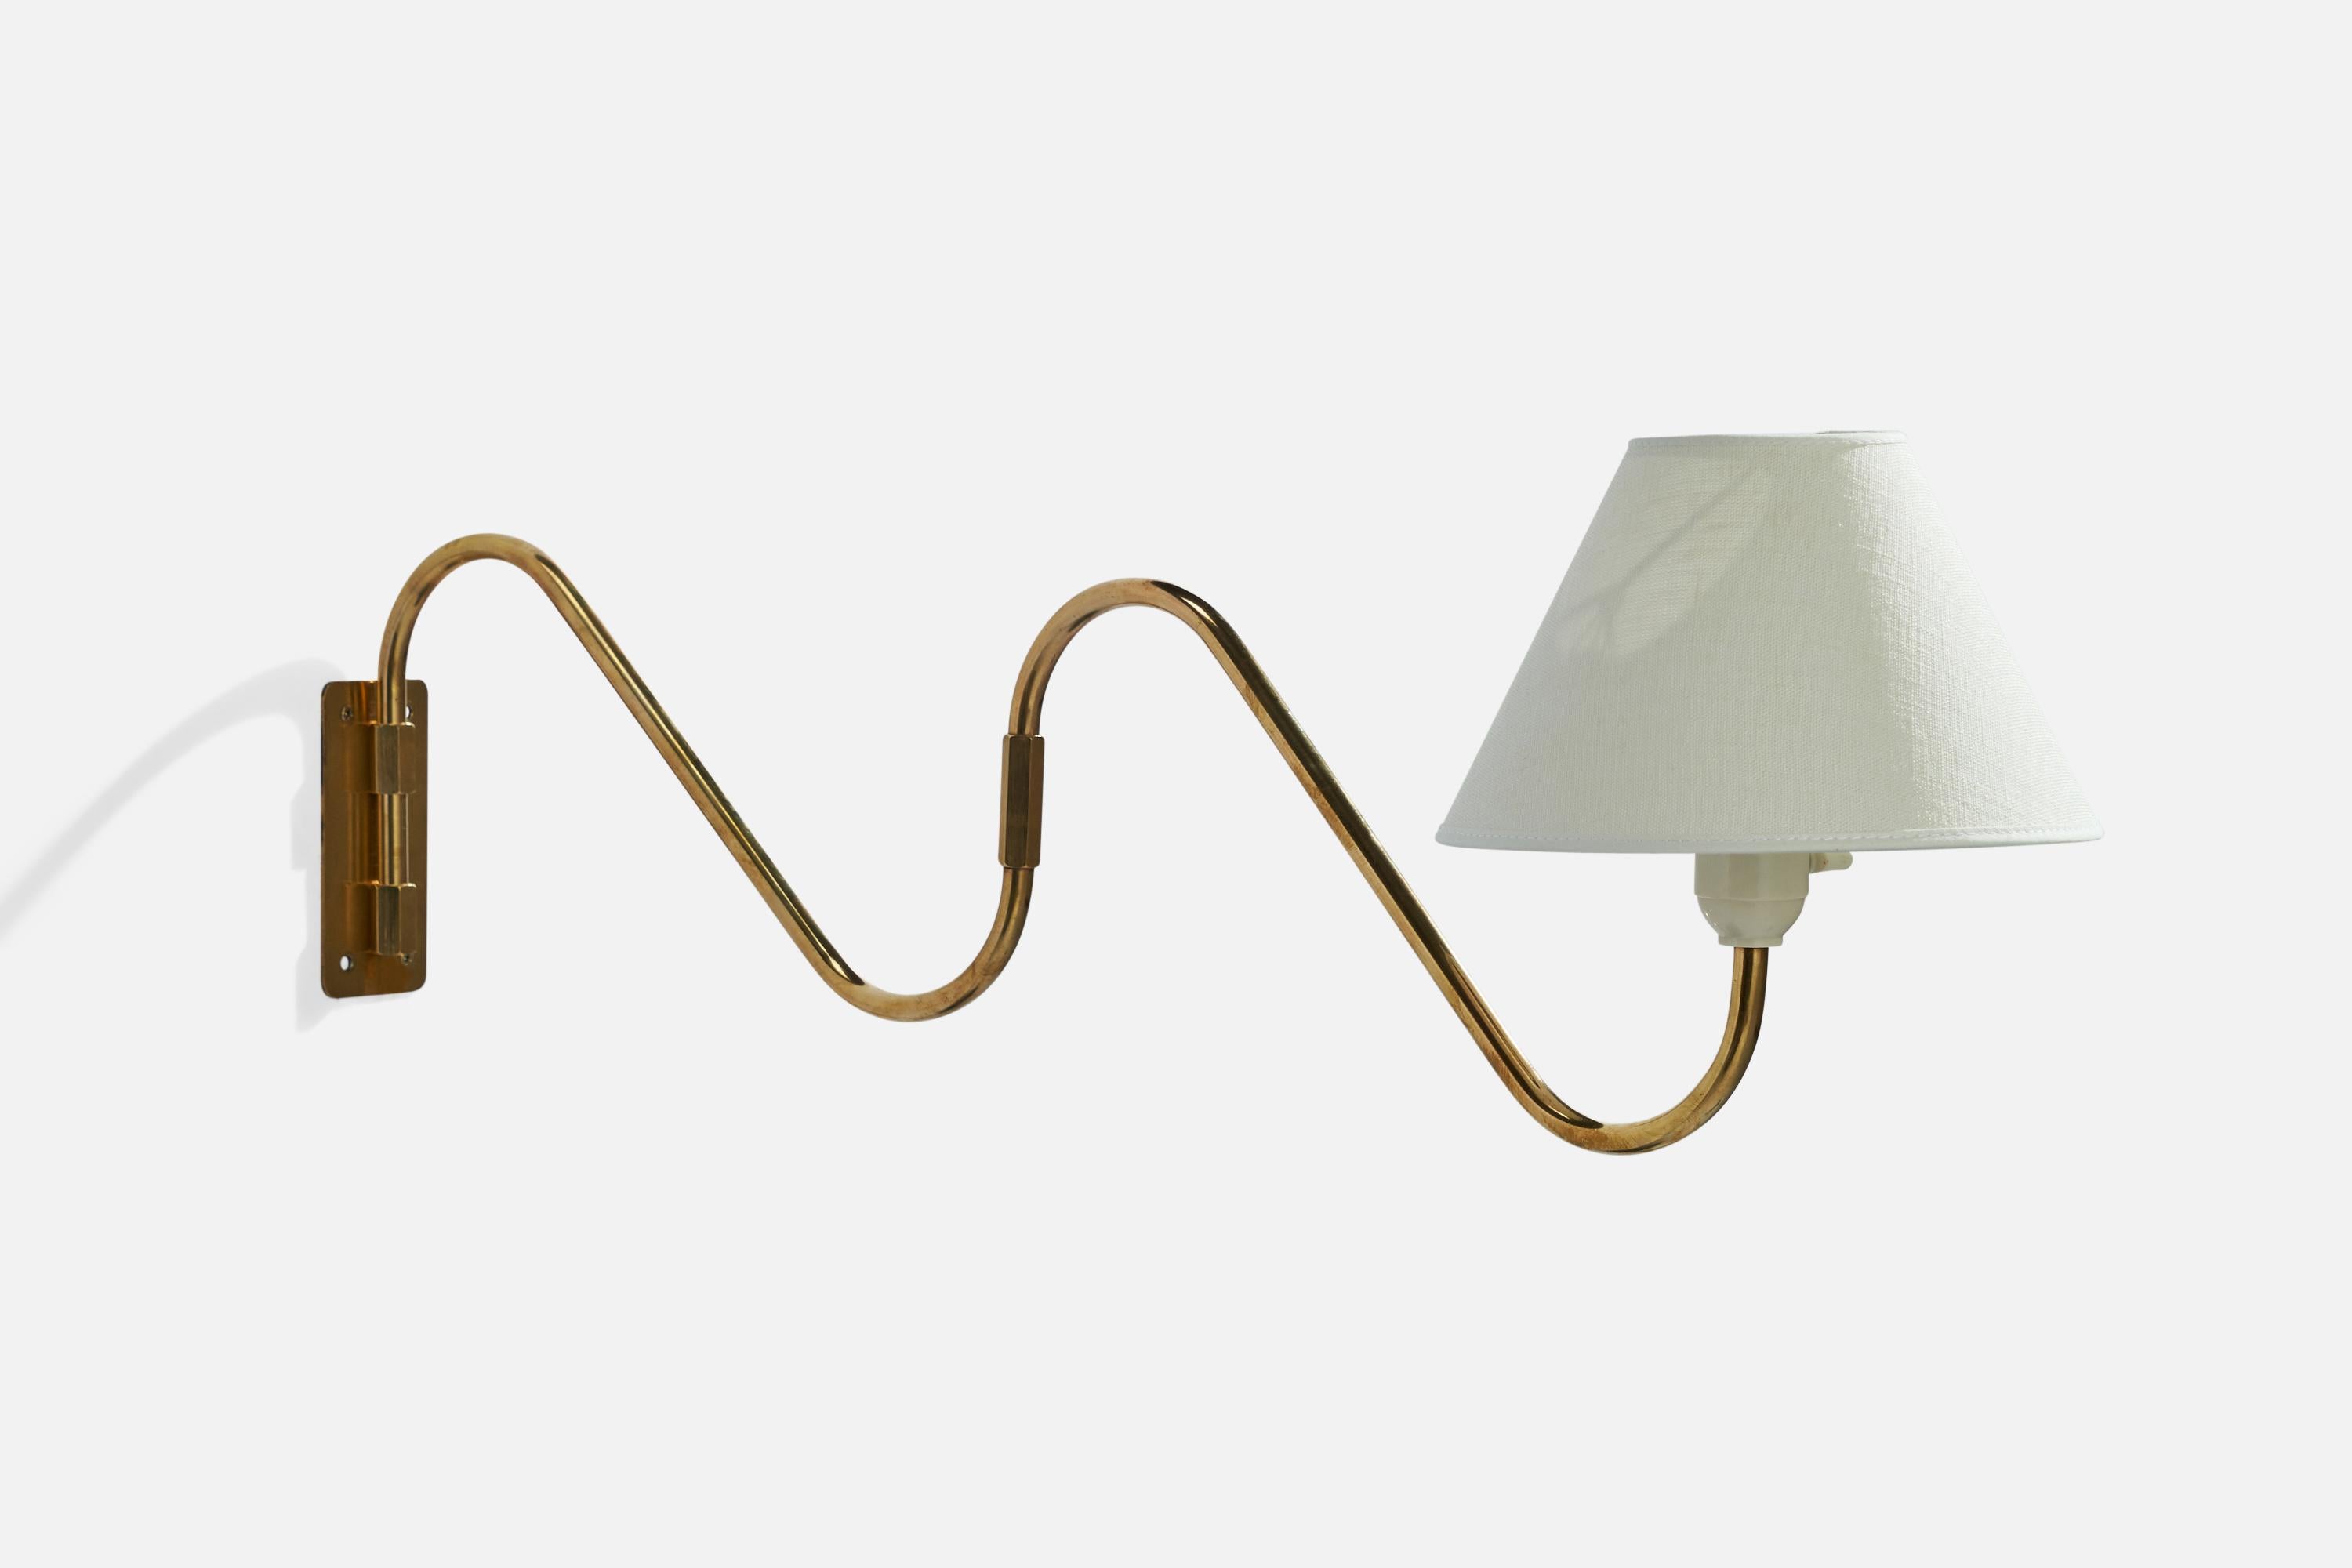 An adjustable brass and white fabric wall light designed and produced in Denmark, 1940s.

Overall Dimensions (inches): 7” H x 24”  W x 25.5” D
Back Plate Dimensions (inches): 4.5”  H x 2.25”  W x .25” D
Bulb Specifications: E-26 Bulb
Number of